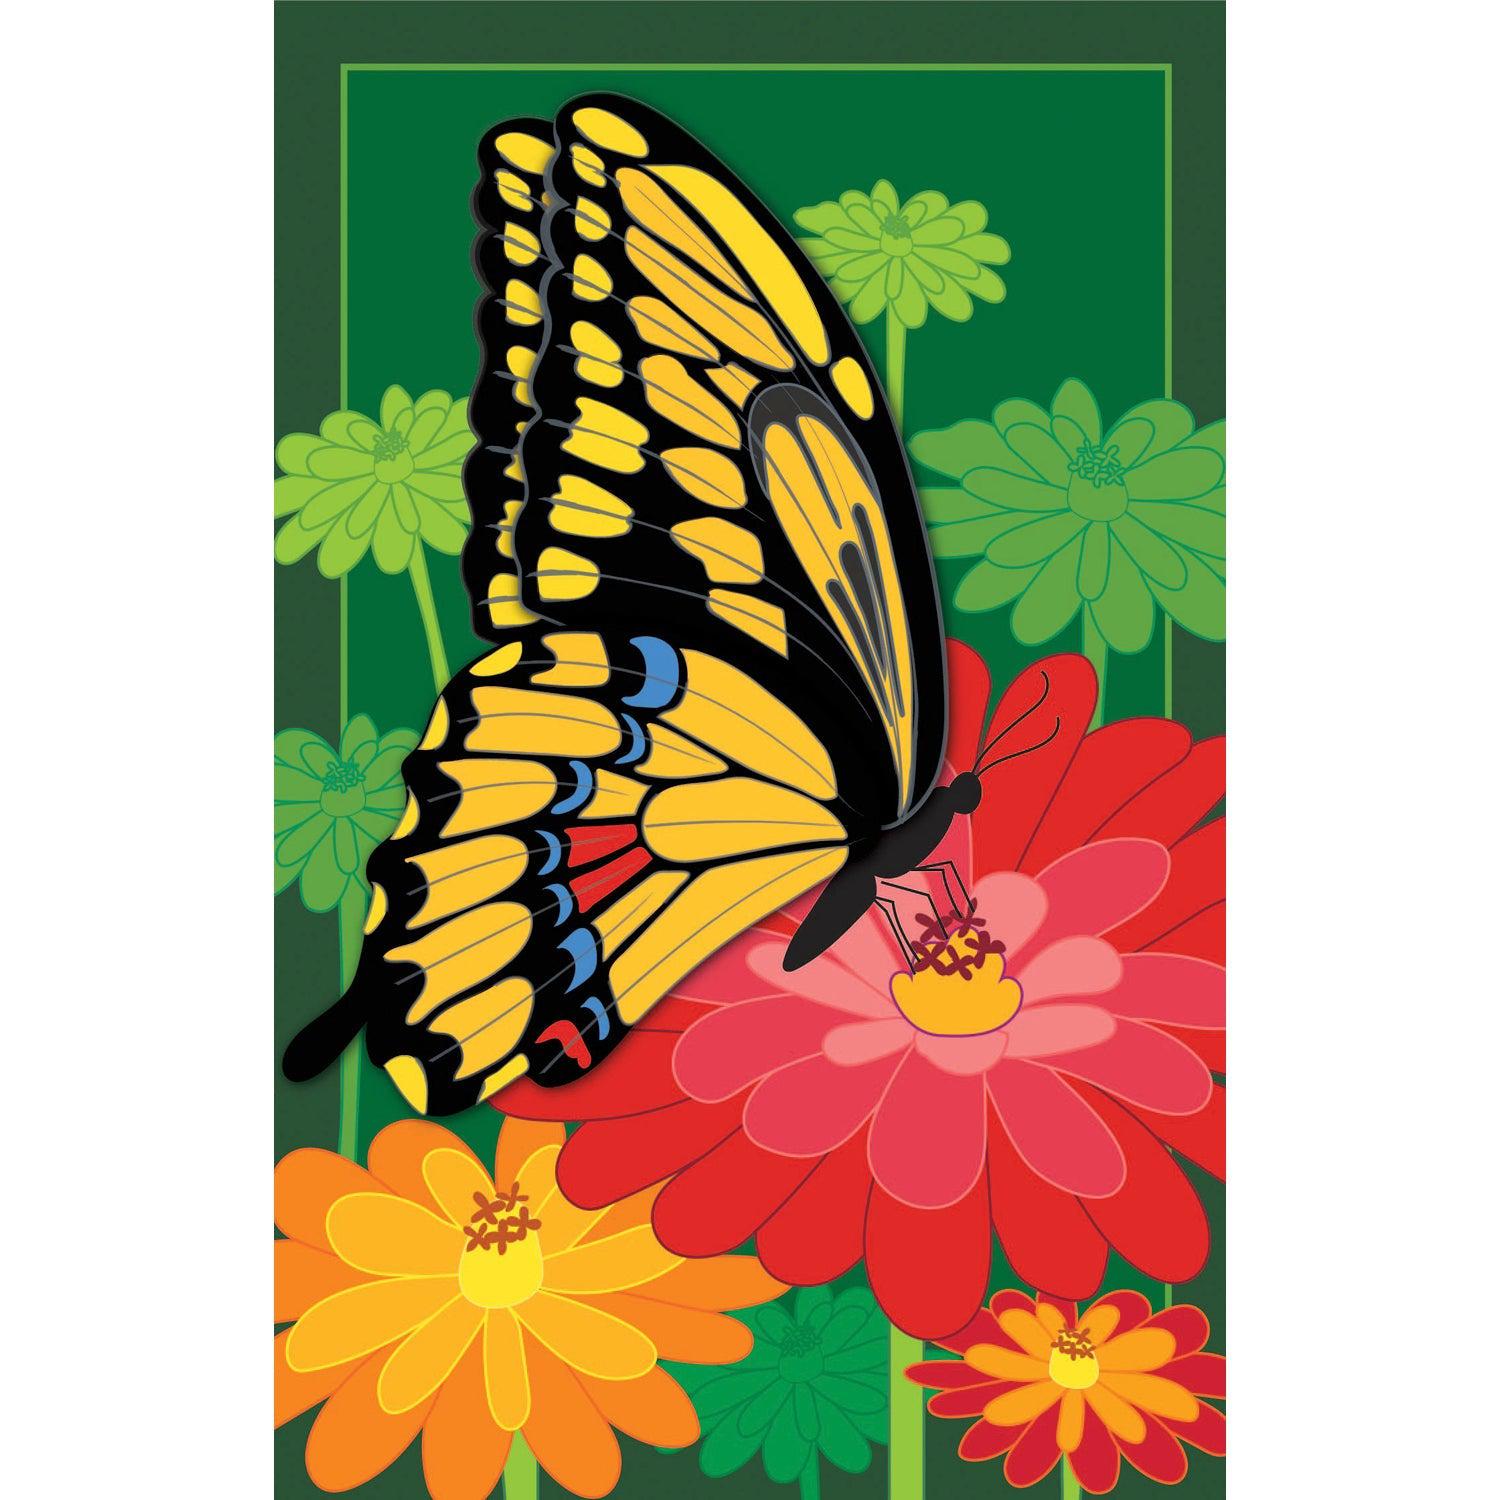 The Blossoms and Butterfly garden flag features a yellow and black butterfly among yellow and red flowers over a green background. 